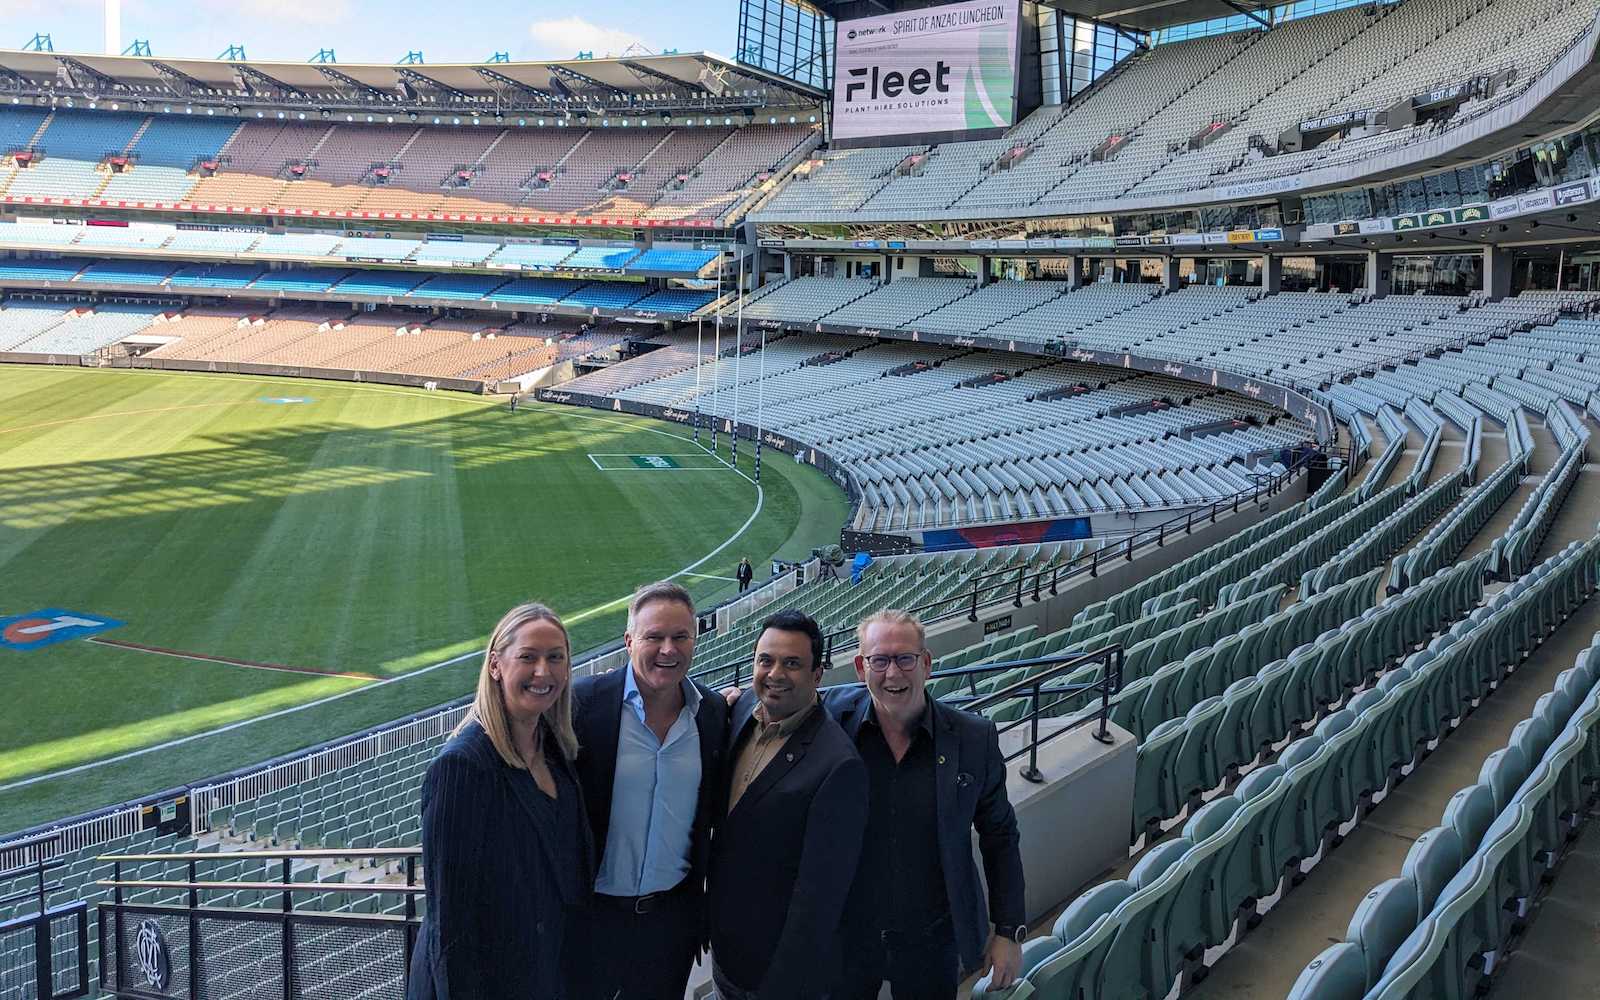 Picture of the Fleet Plant Hire team and Luminary team at MCG